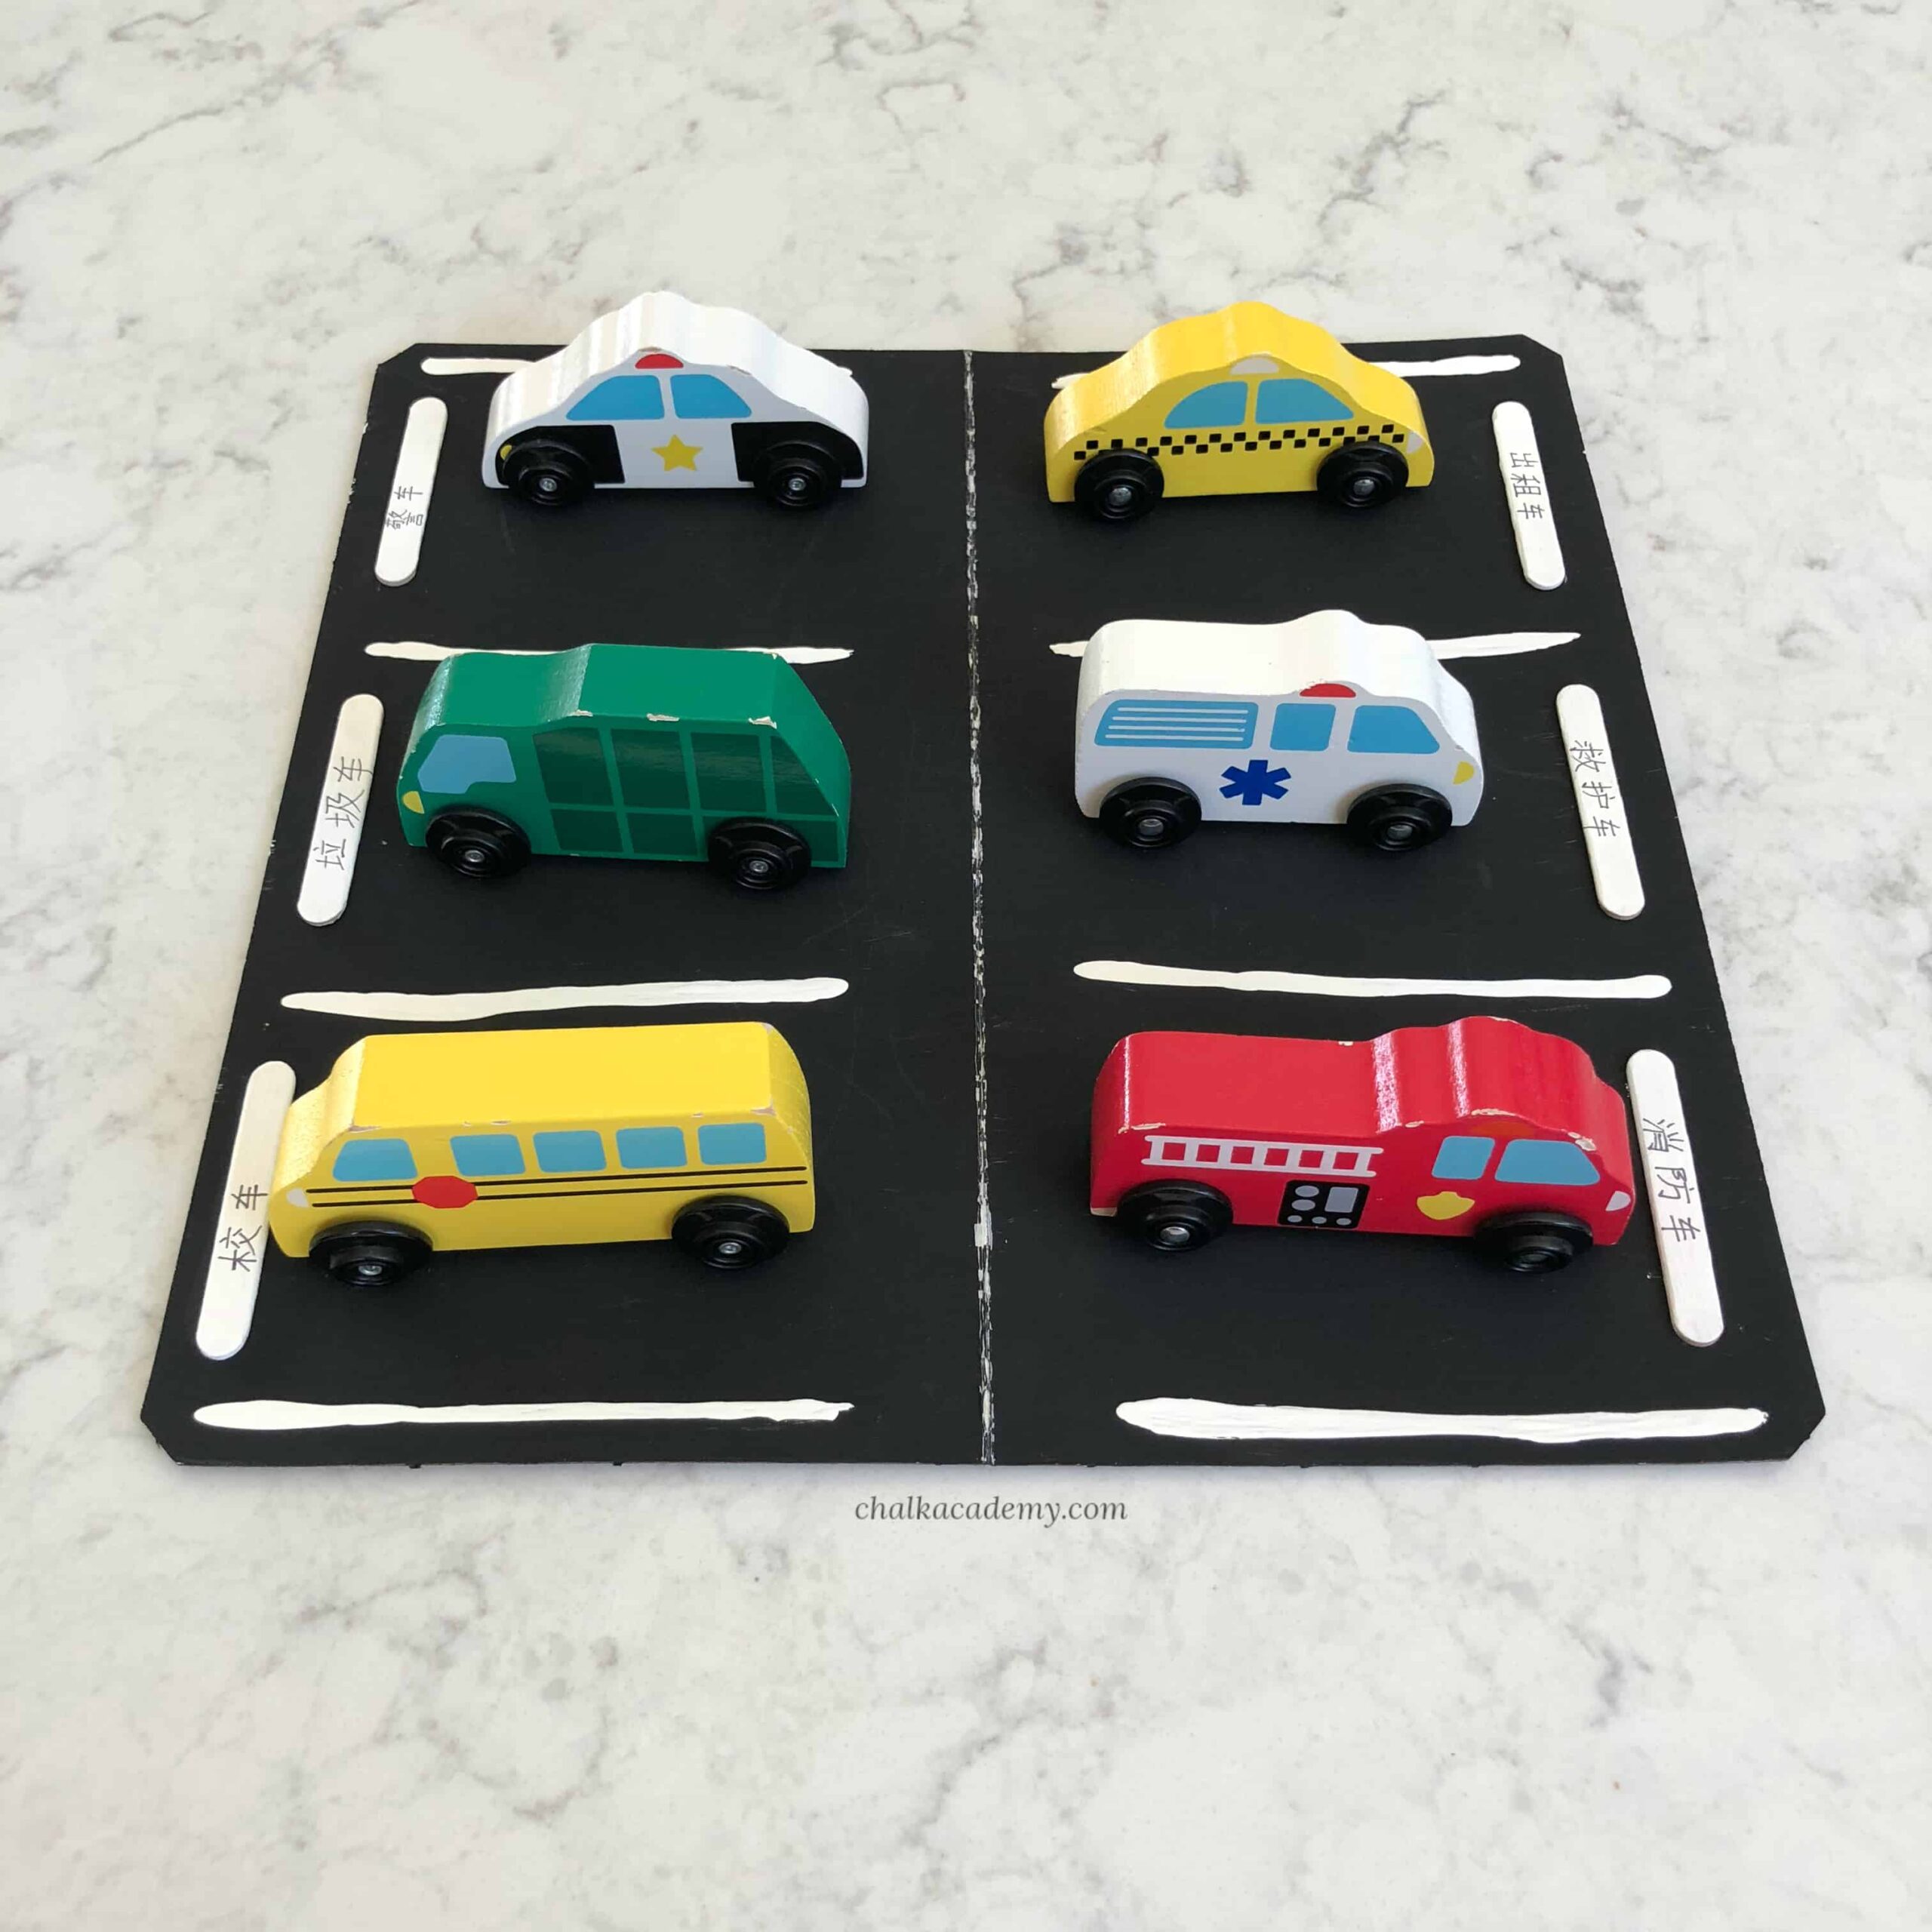 Parking Lot Craft and Toy Car Matching Activity